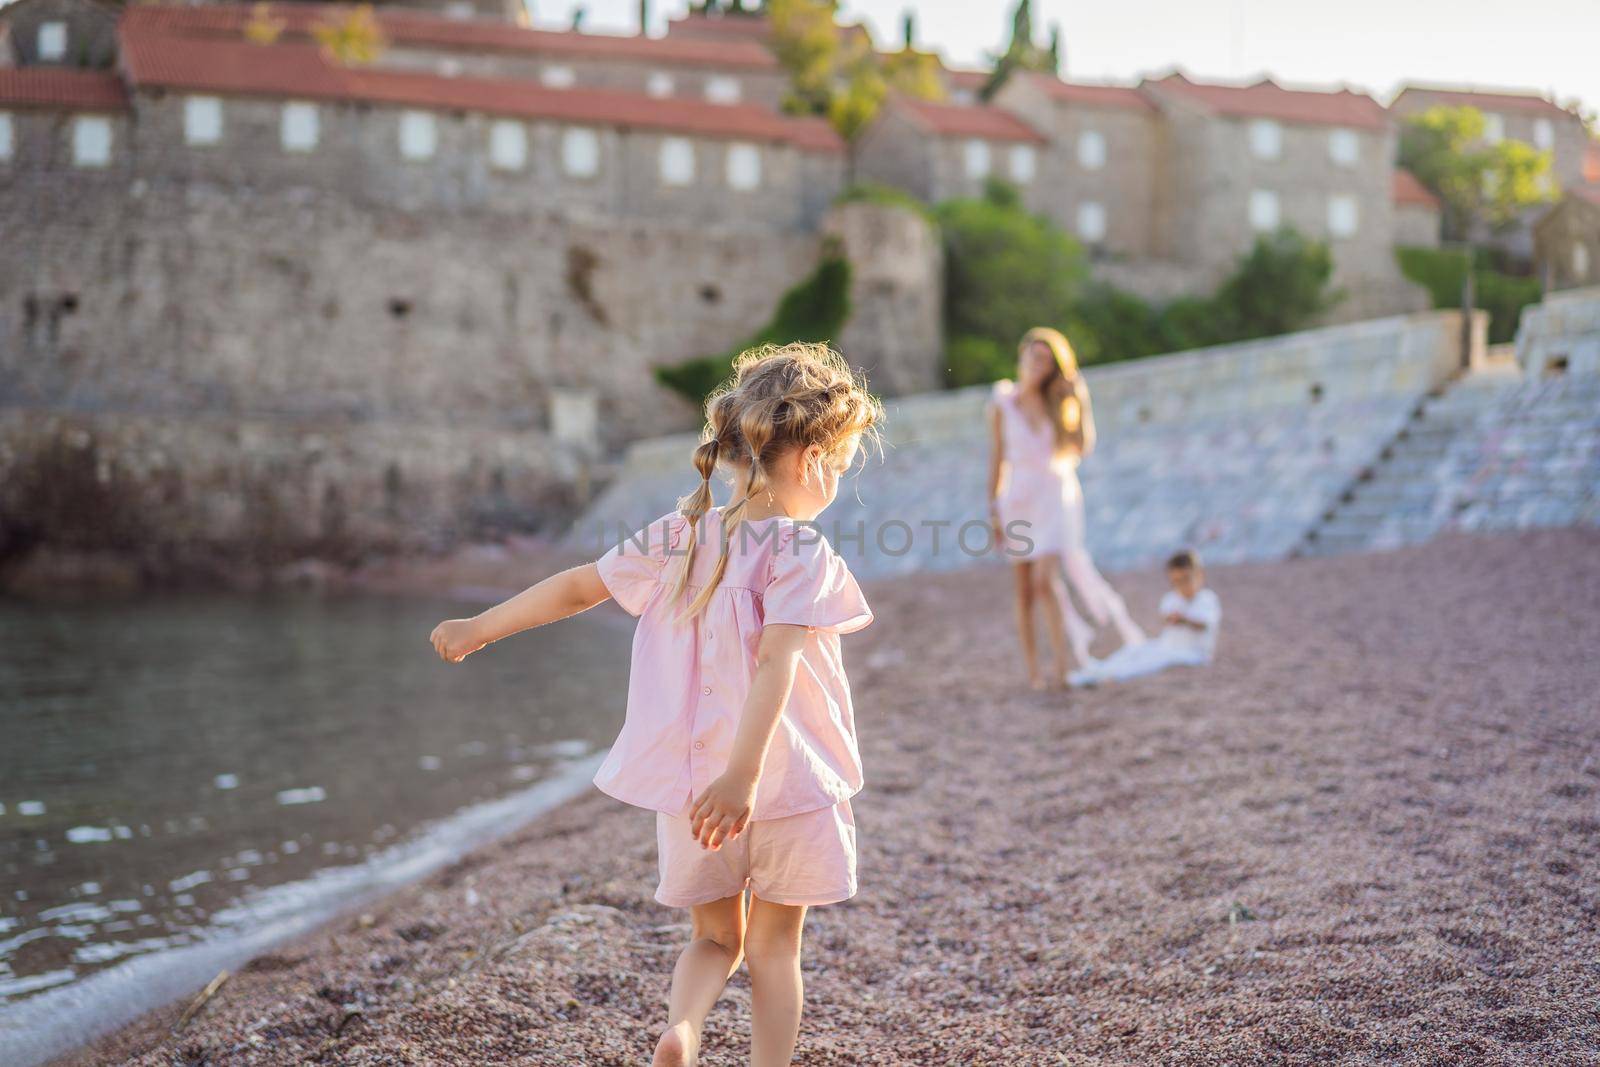 Mother and two children daughter and son tourists on background of beautiful view St. Stephen island, Sveti Stefan on the Budva Riviera, Budva, Montenegro. Travel to Montenegro concept.